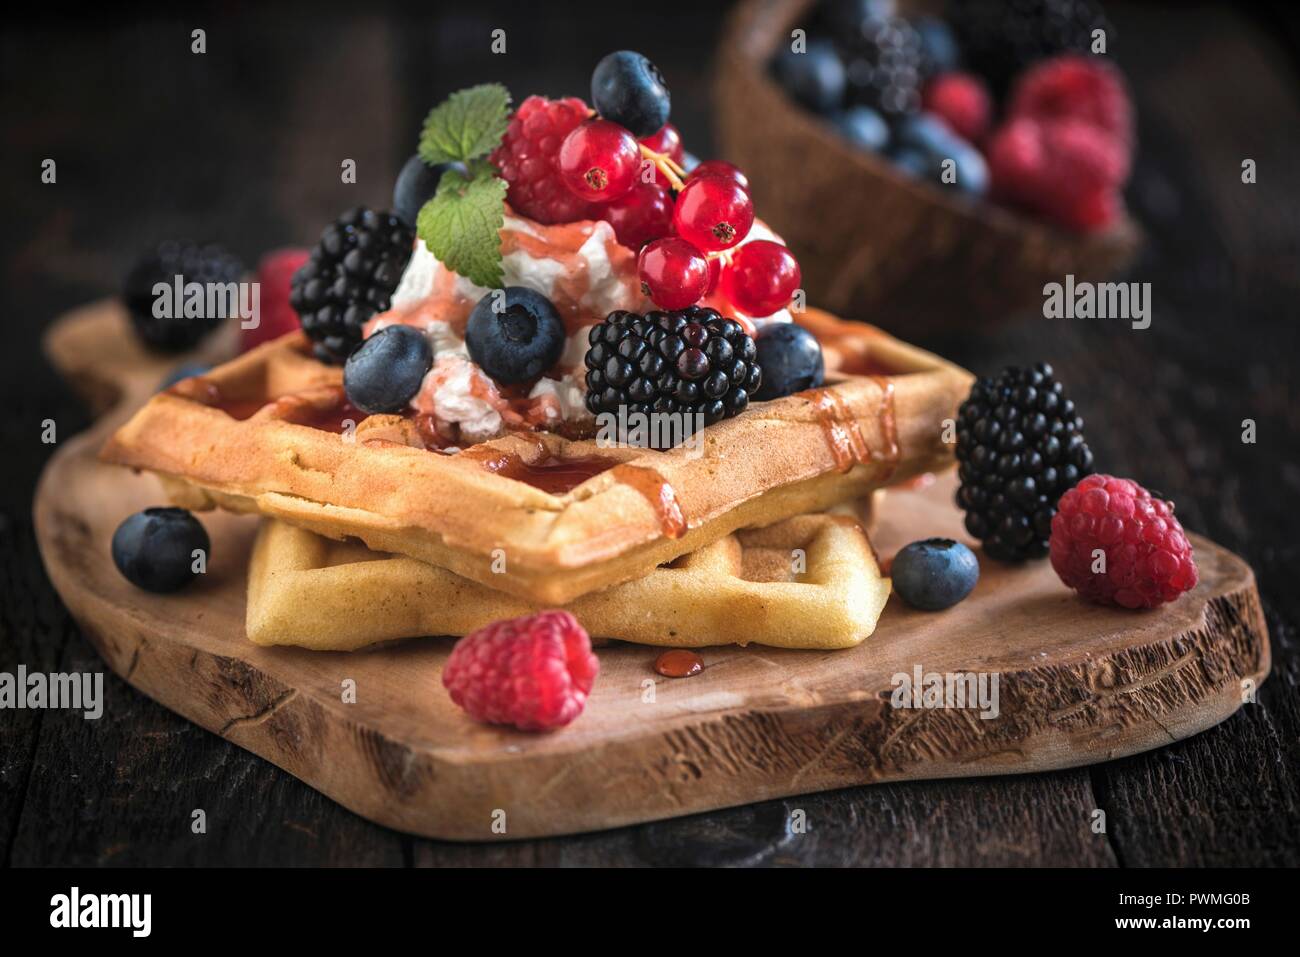 Belgian waffles with ice cream and berries on a wooden board Stock Photo